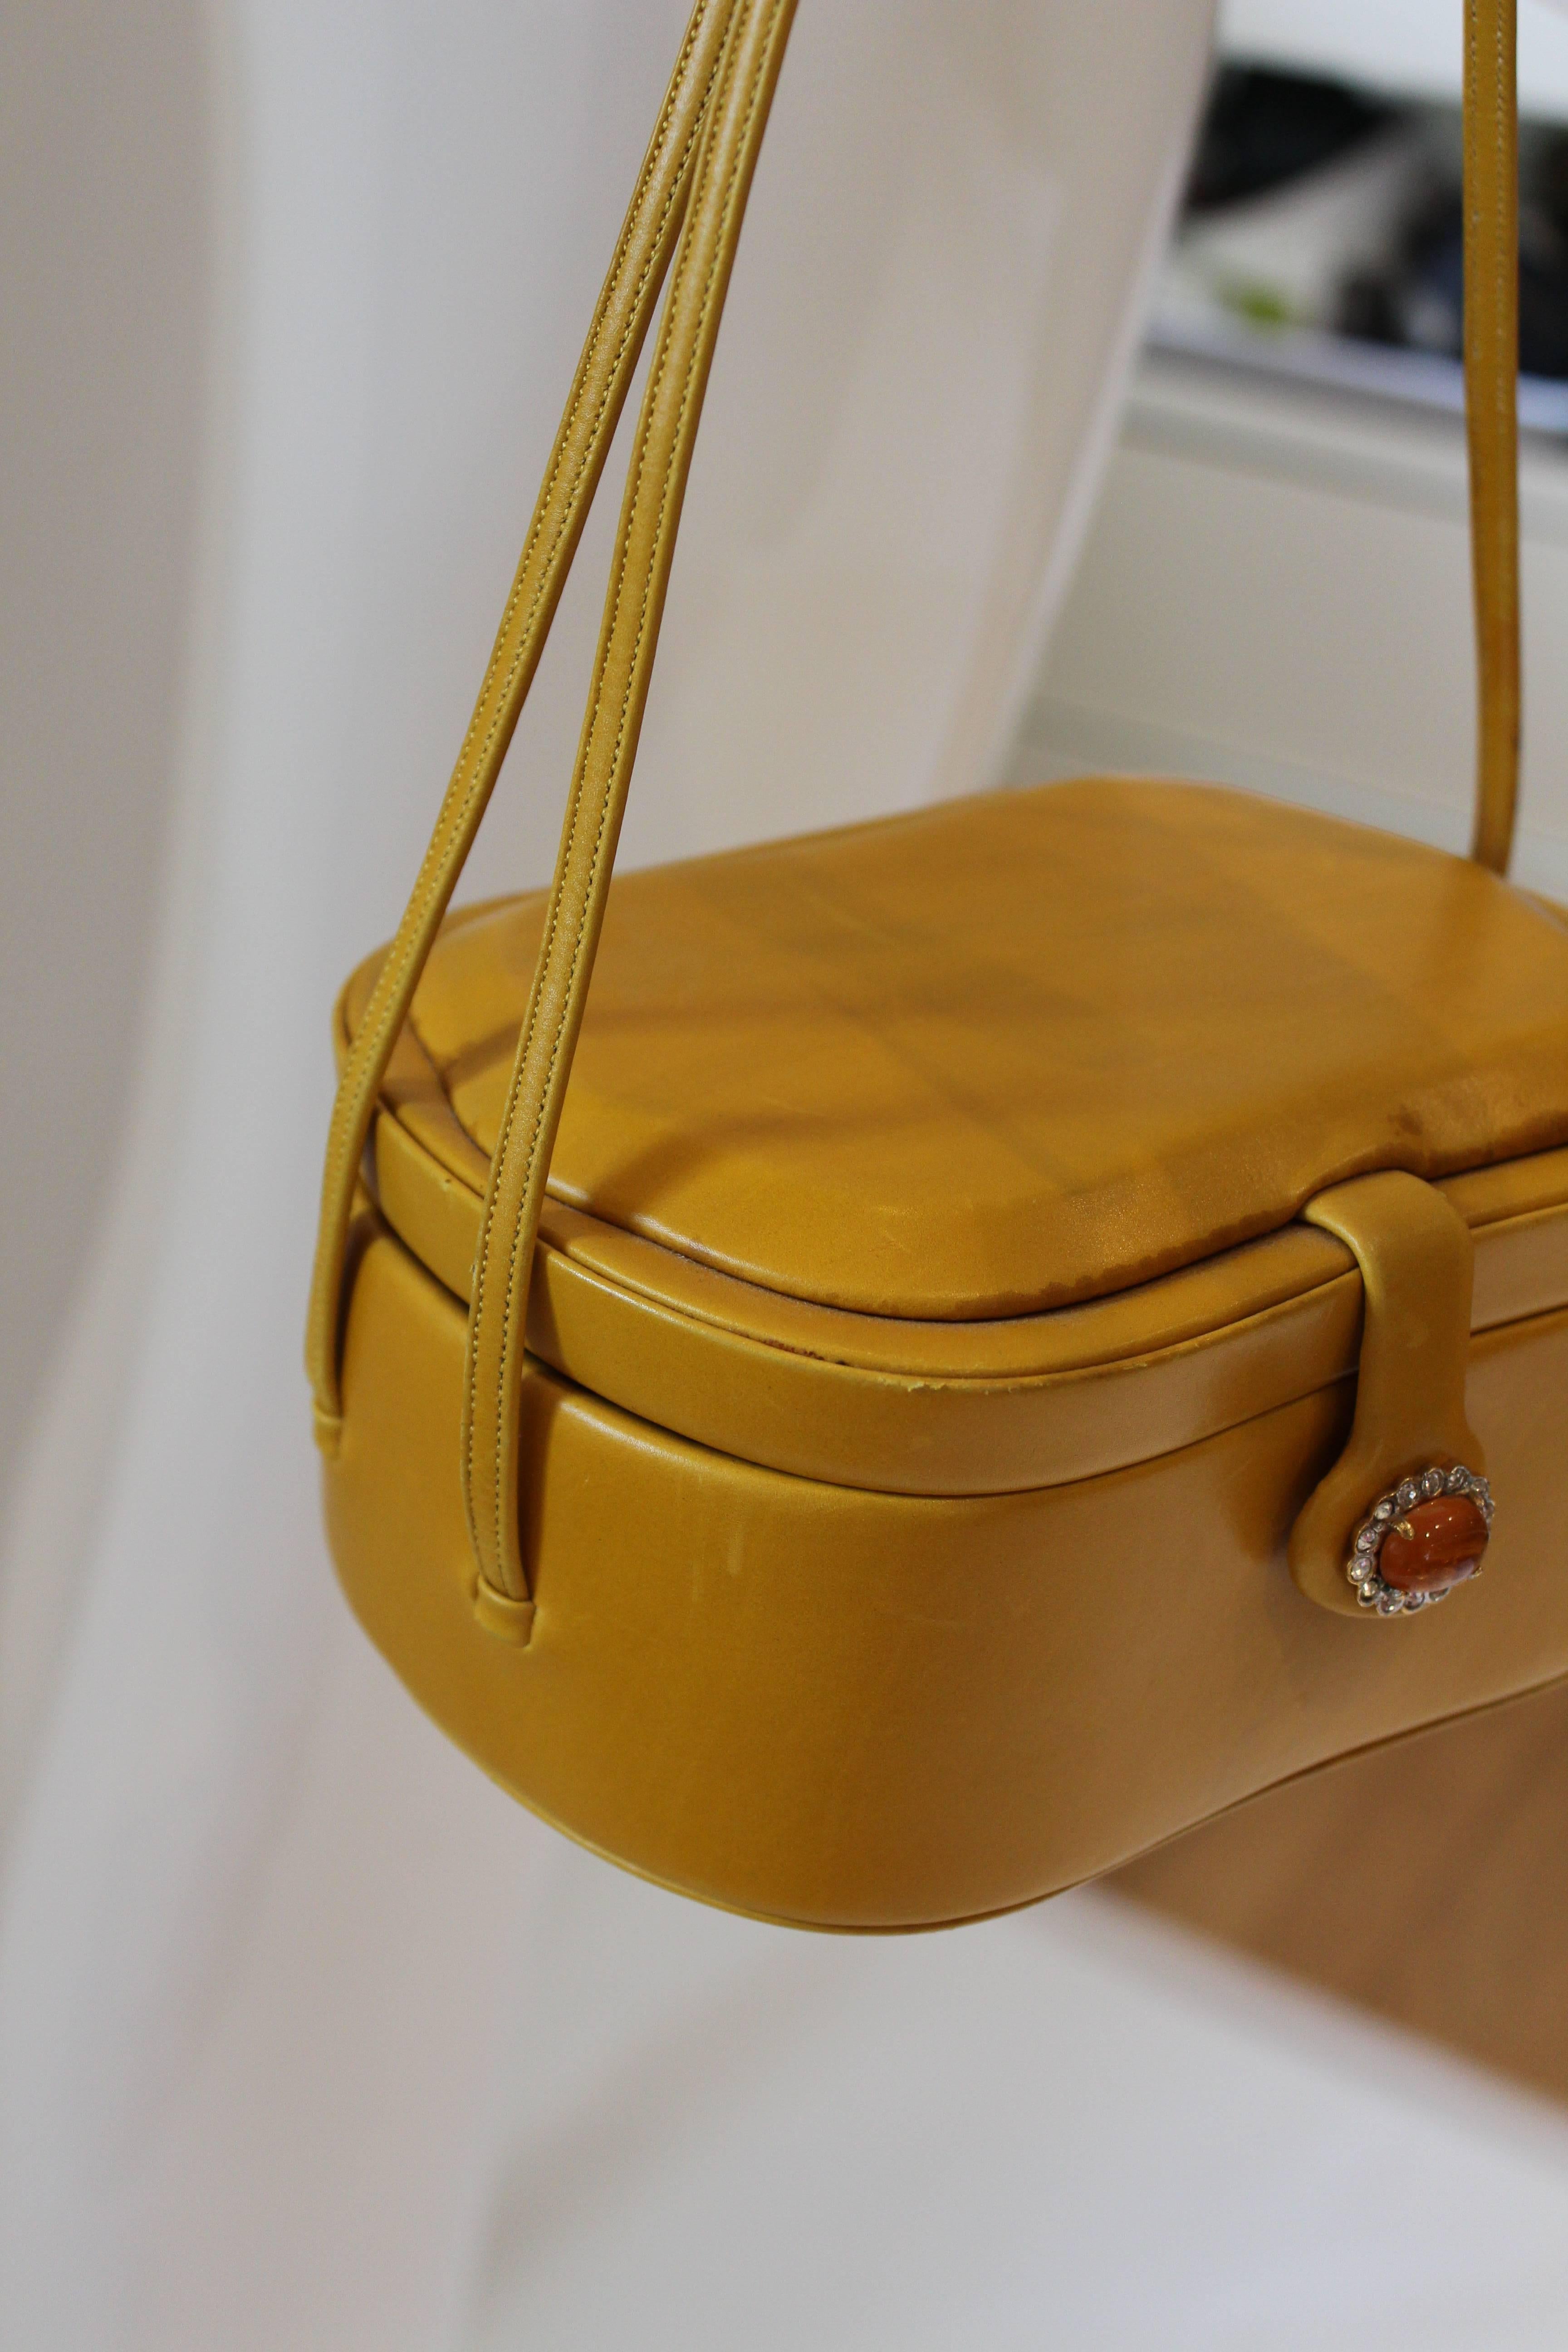 Measurements in inches: 
Strap length to bottom of bag: 11
Width: 6.5
Hight: 3
Depth: 5
This Judith Leiber box bag is fine mustard colored leather is quite a masterpiece. Features double strap, snap closure with yellow gemstone and rhinestone